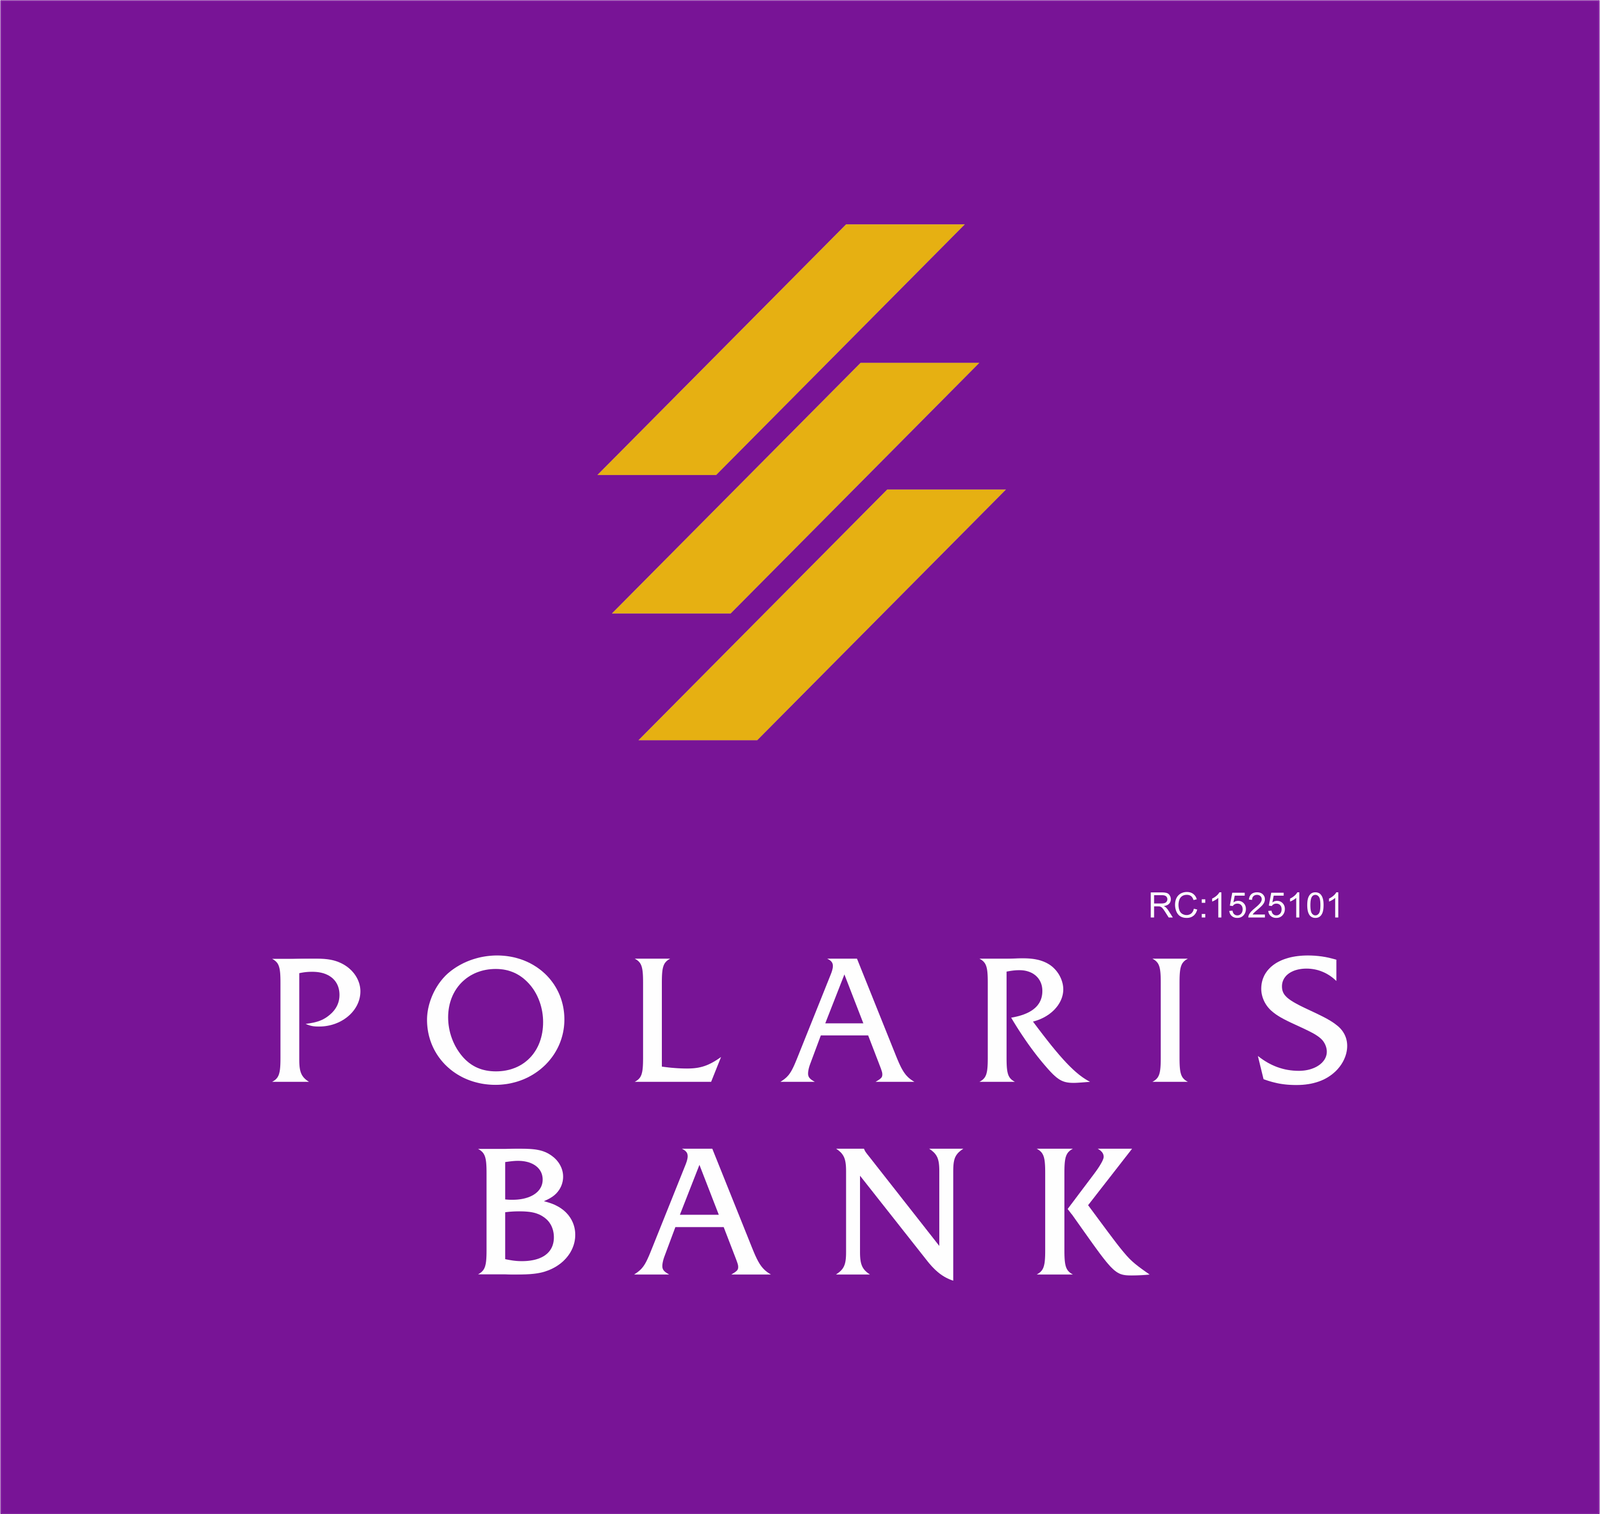 CBN AND AMCON APPROVES THE SALE OF POLARIS BANK